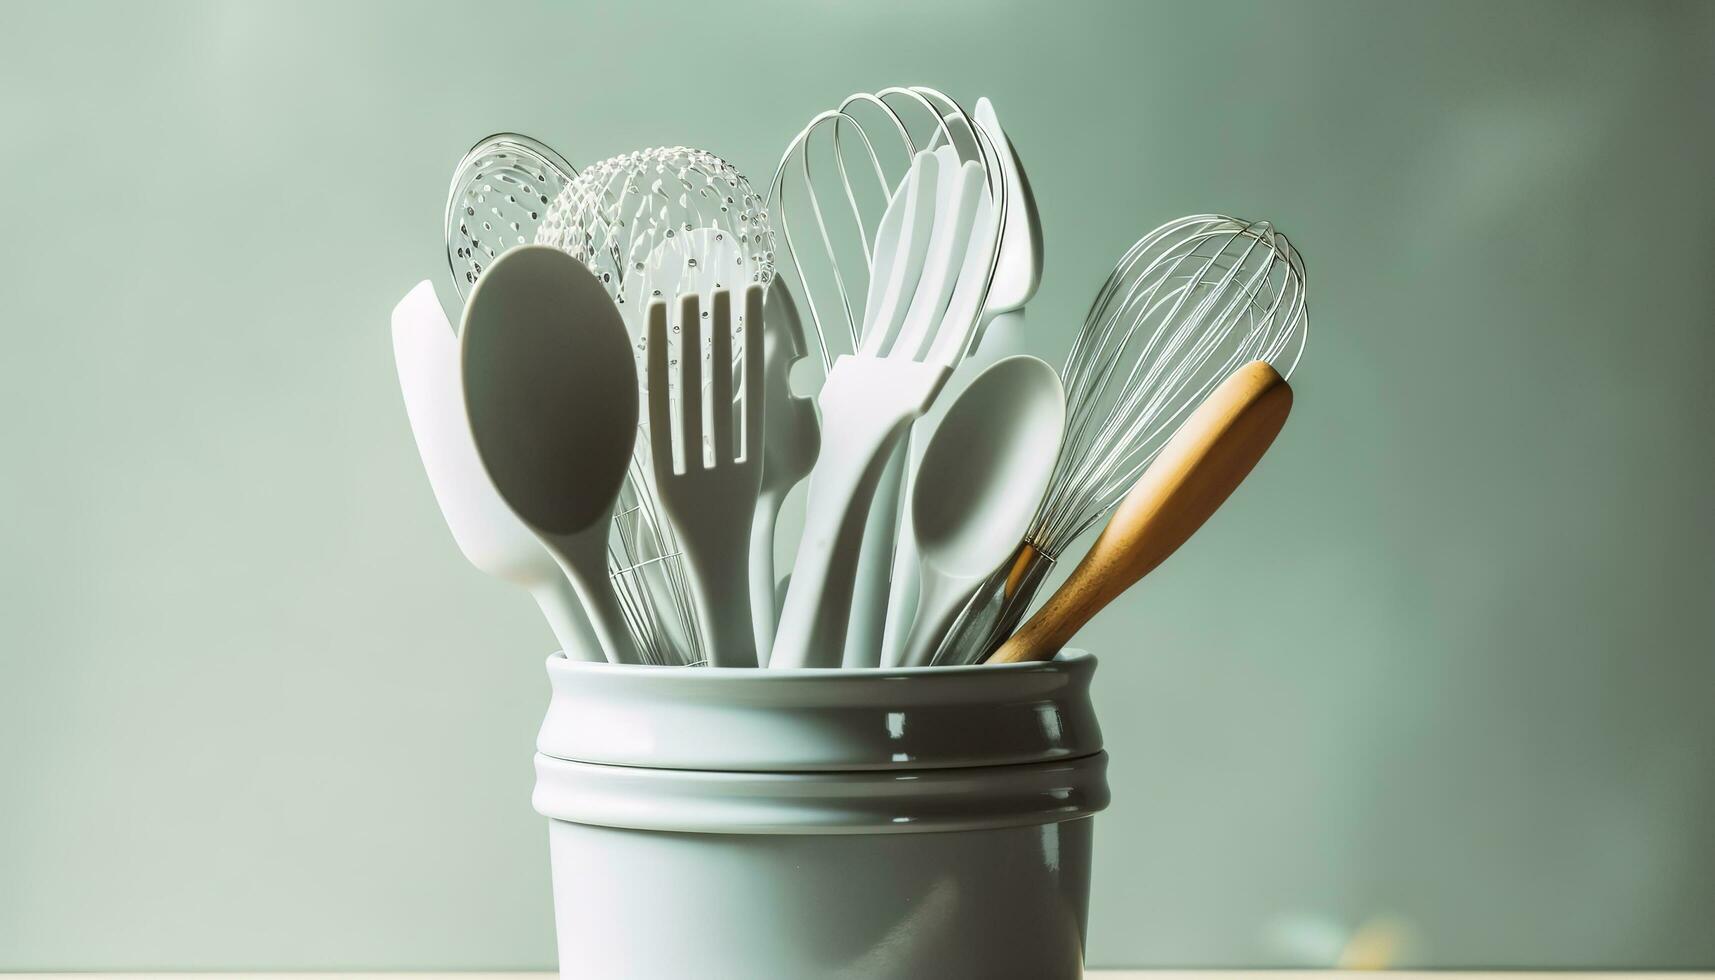 Kitchen utensils Free Stock Photos, Images, and Pictures of